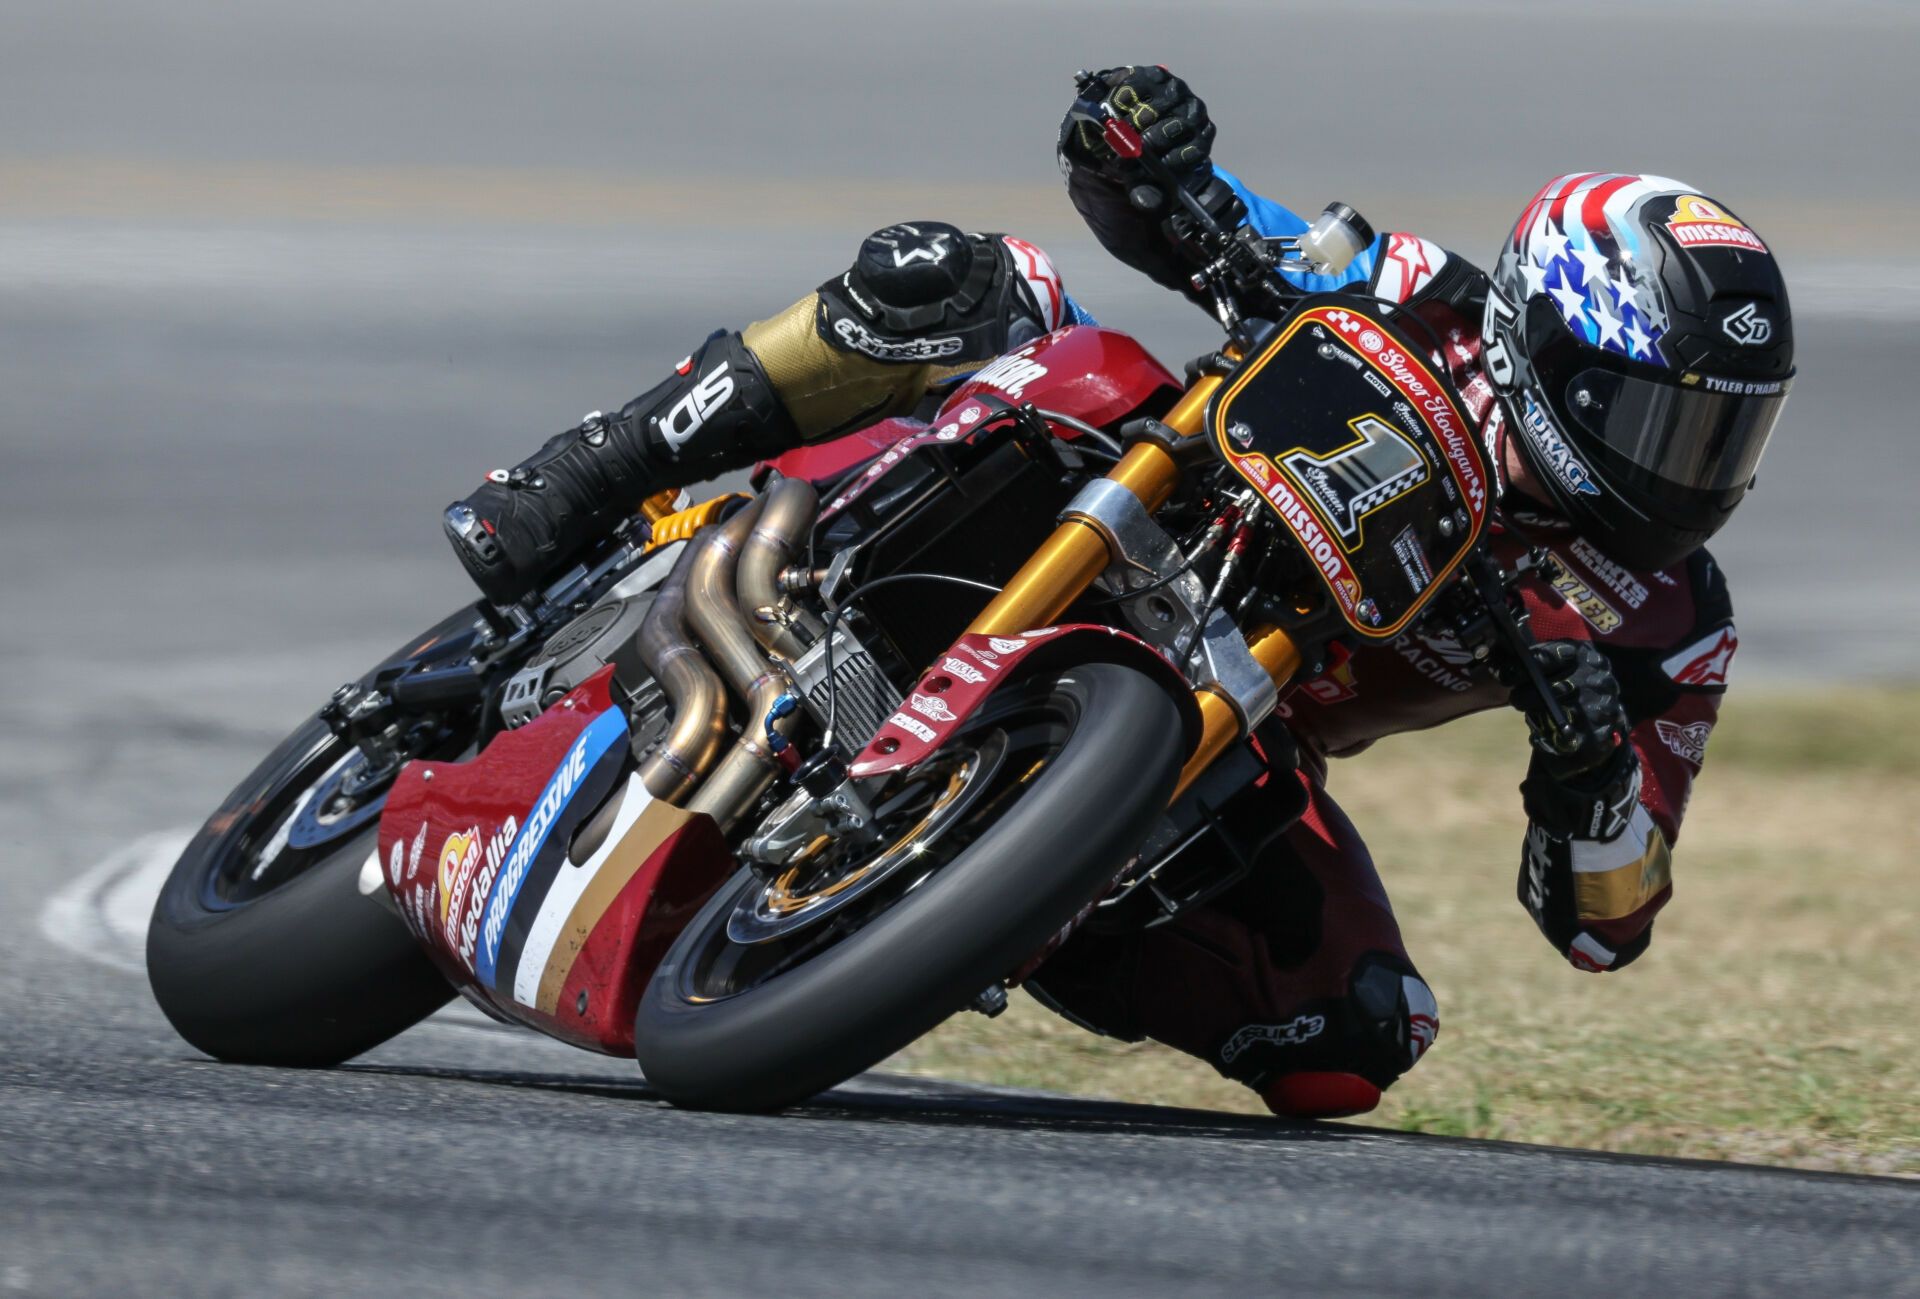 Tyler O'Hara (1) in action on Indian FTR 1200 earlier this season at Daytona. Photo by Brian J. Nelson.